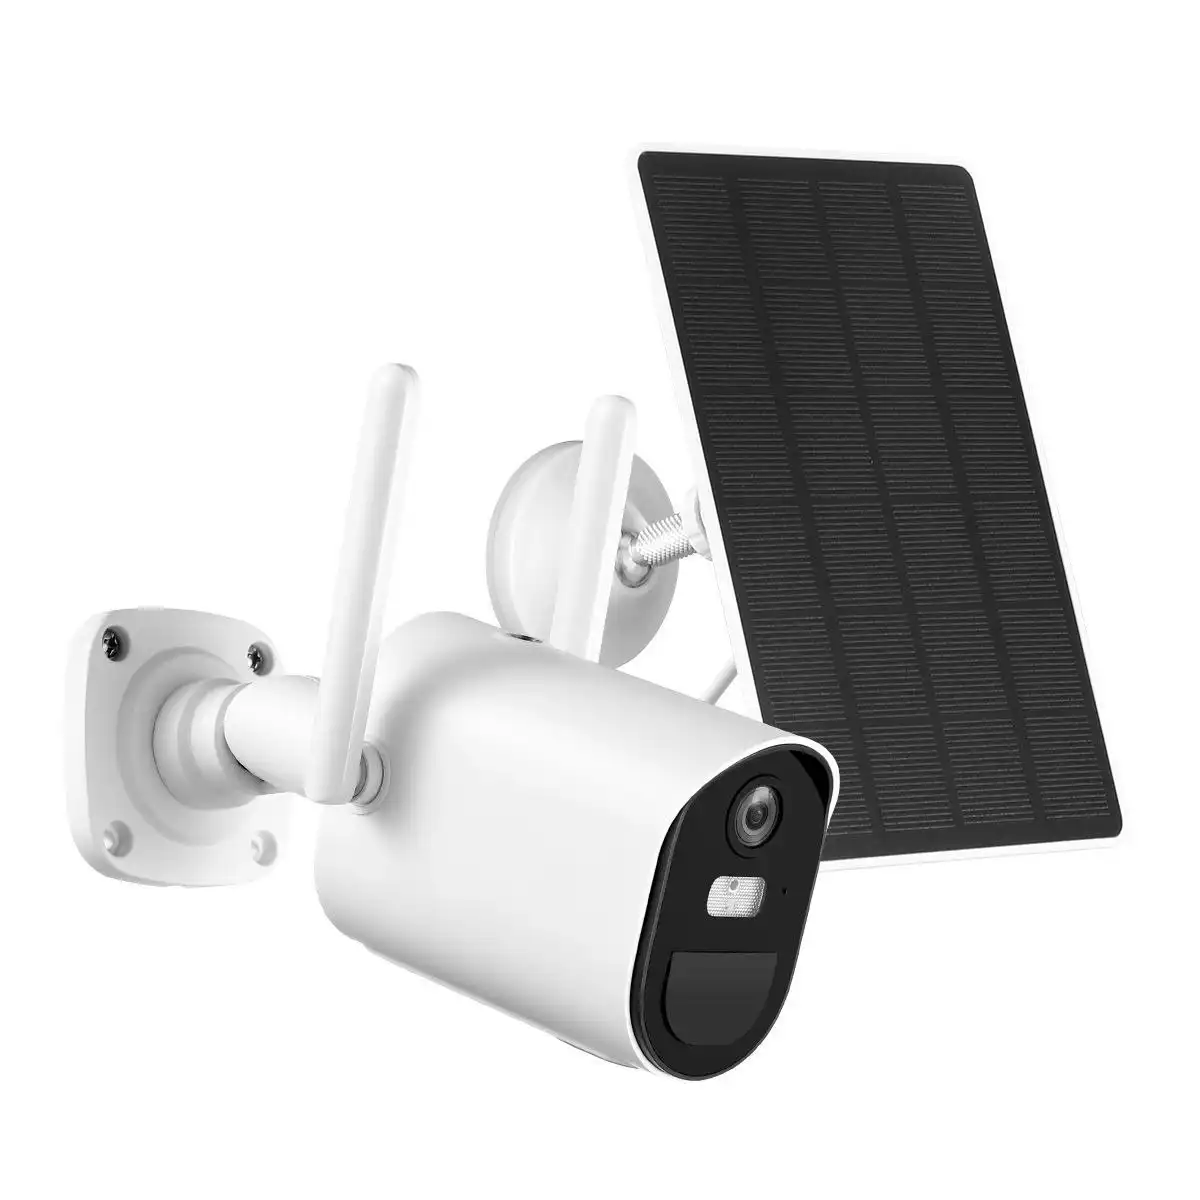 Ausway Anisee WIFI Camera CCTV Installation Solar Powered Surveillance Home Security System